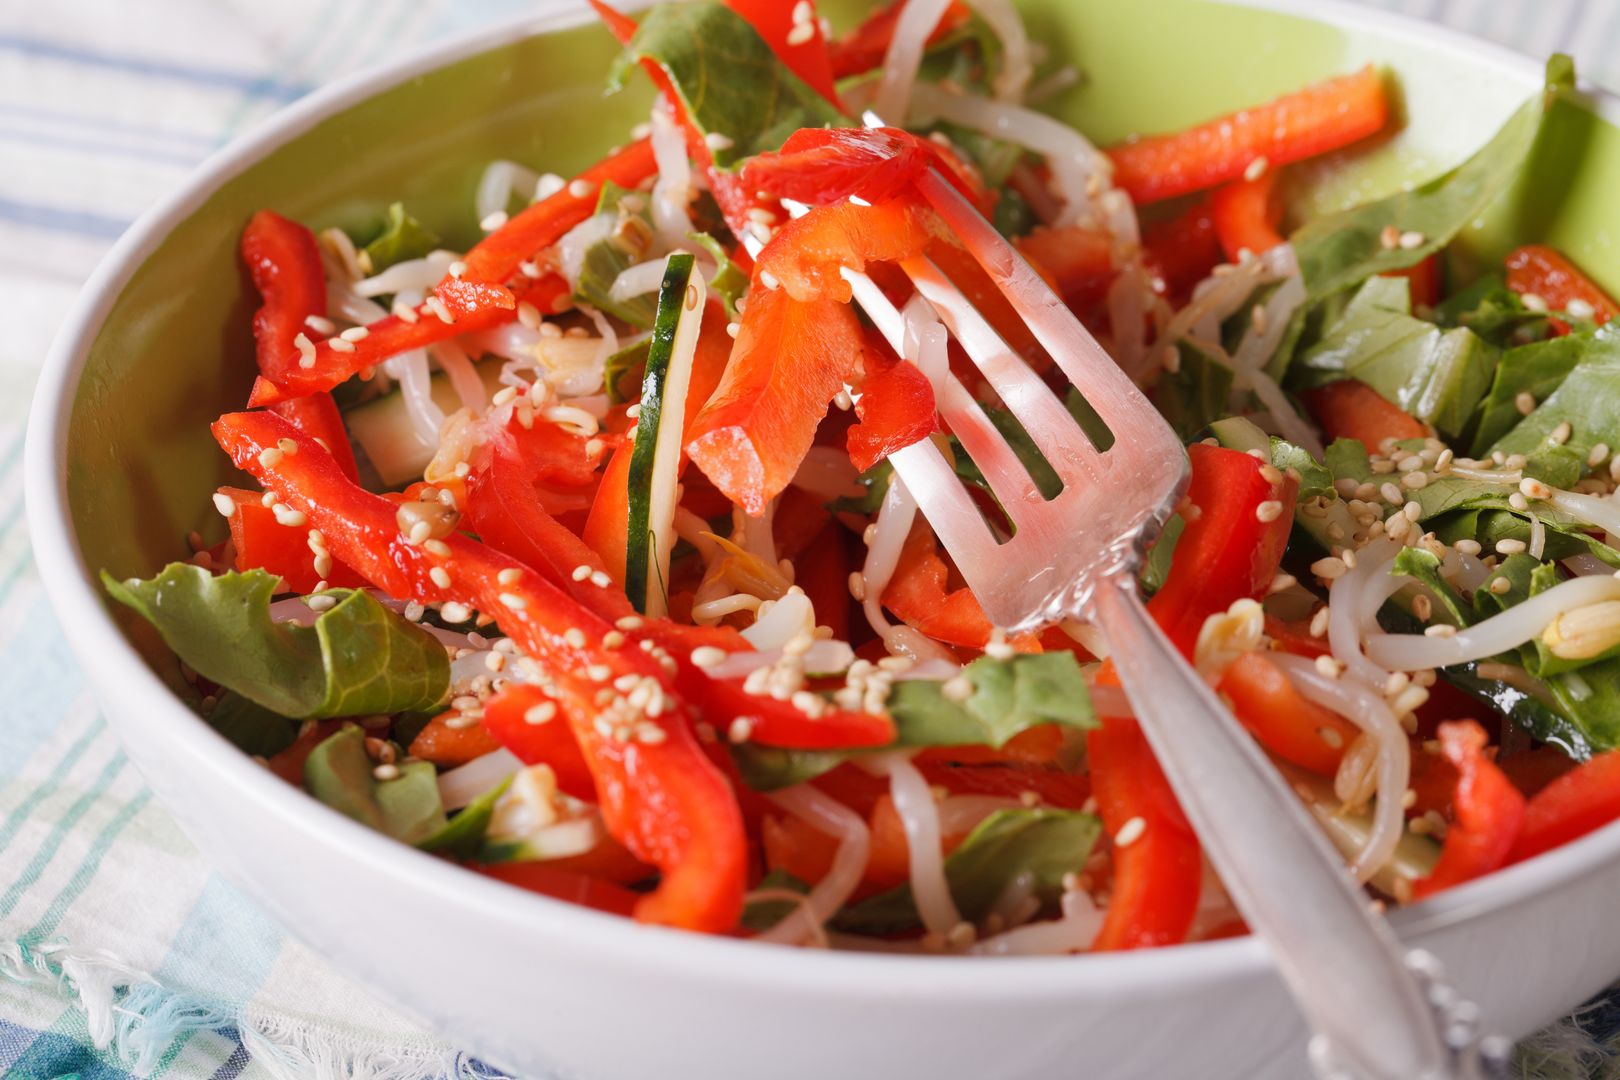 Revolutionize your BBQ with this simple Grilled Bell Pepper Salad